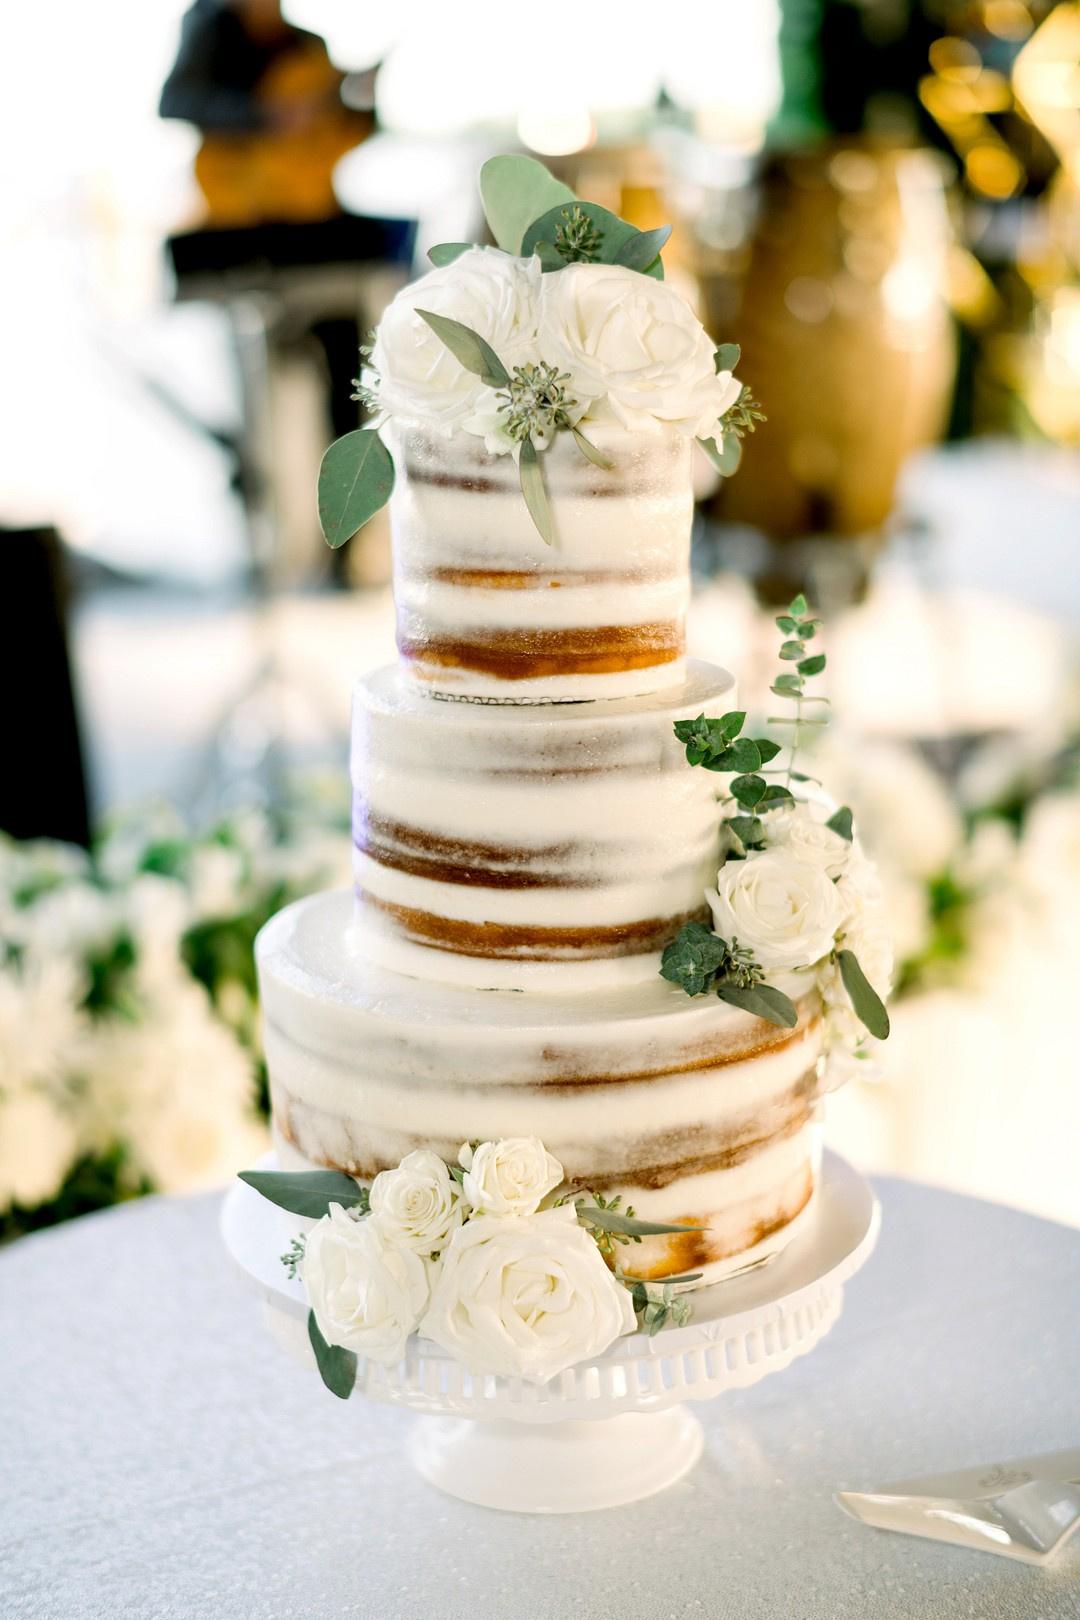 How to Bake and Decorate a 3-Tier Wedding Cake